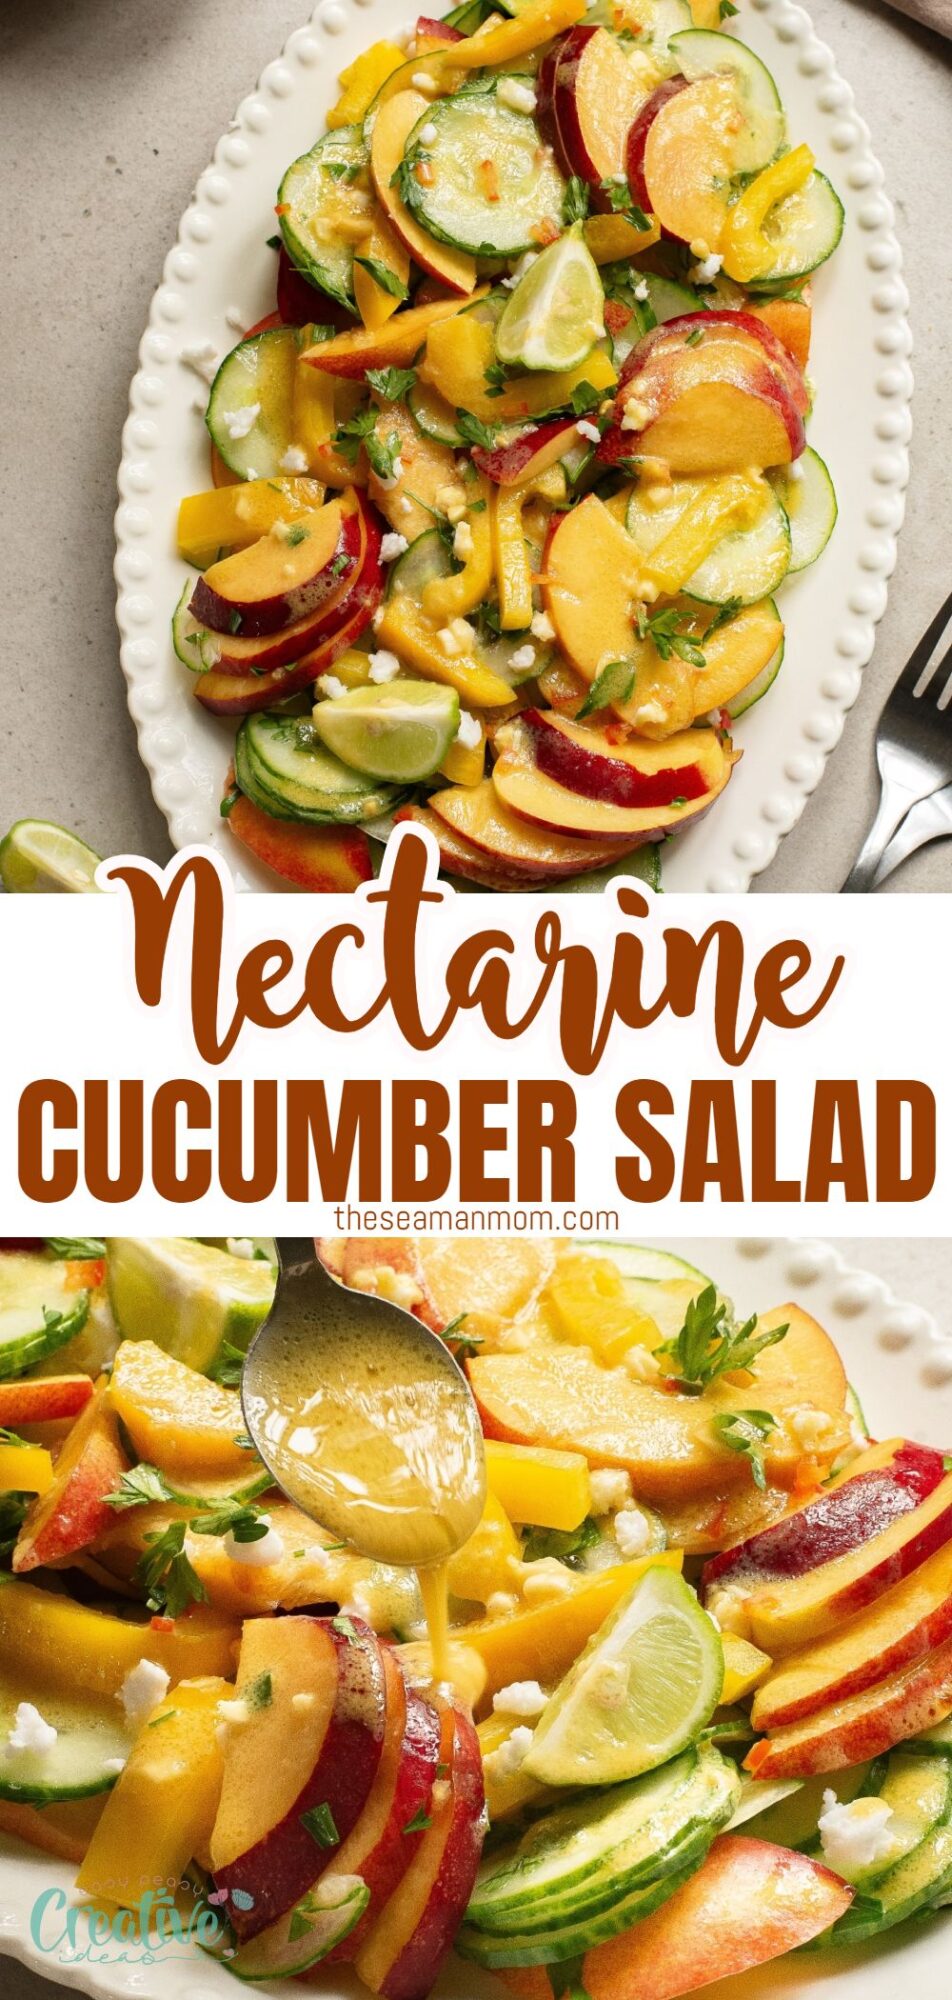 A refreshing plate of sliced peaches and cucumbers with a flavorful dressing. A burst of energy and vitamins to keep you going! Perfect for any time of day, whether you need a vibrant start, a mid-day refresh, or a light, wholesome meal. Customize it to your liking or dietary needs. Enjoy!